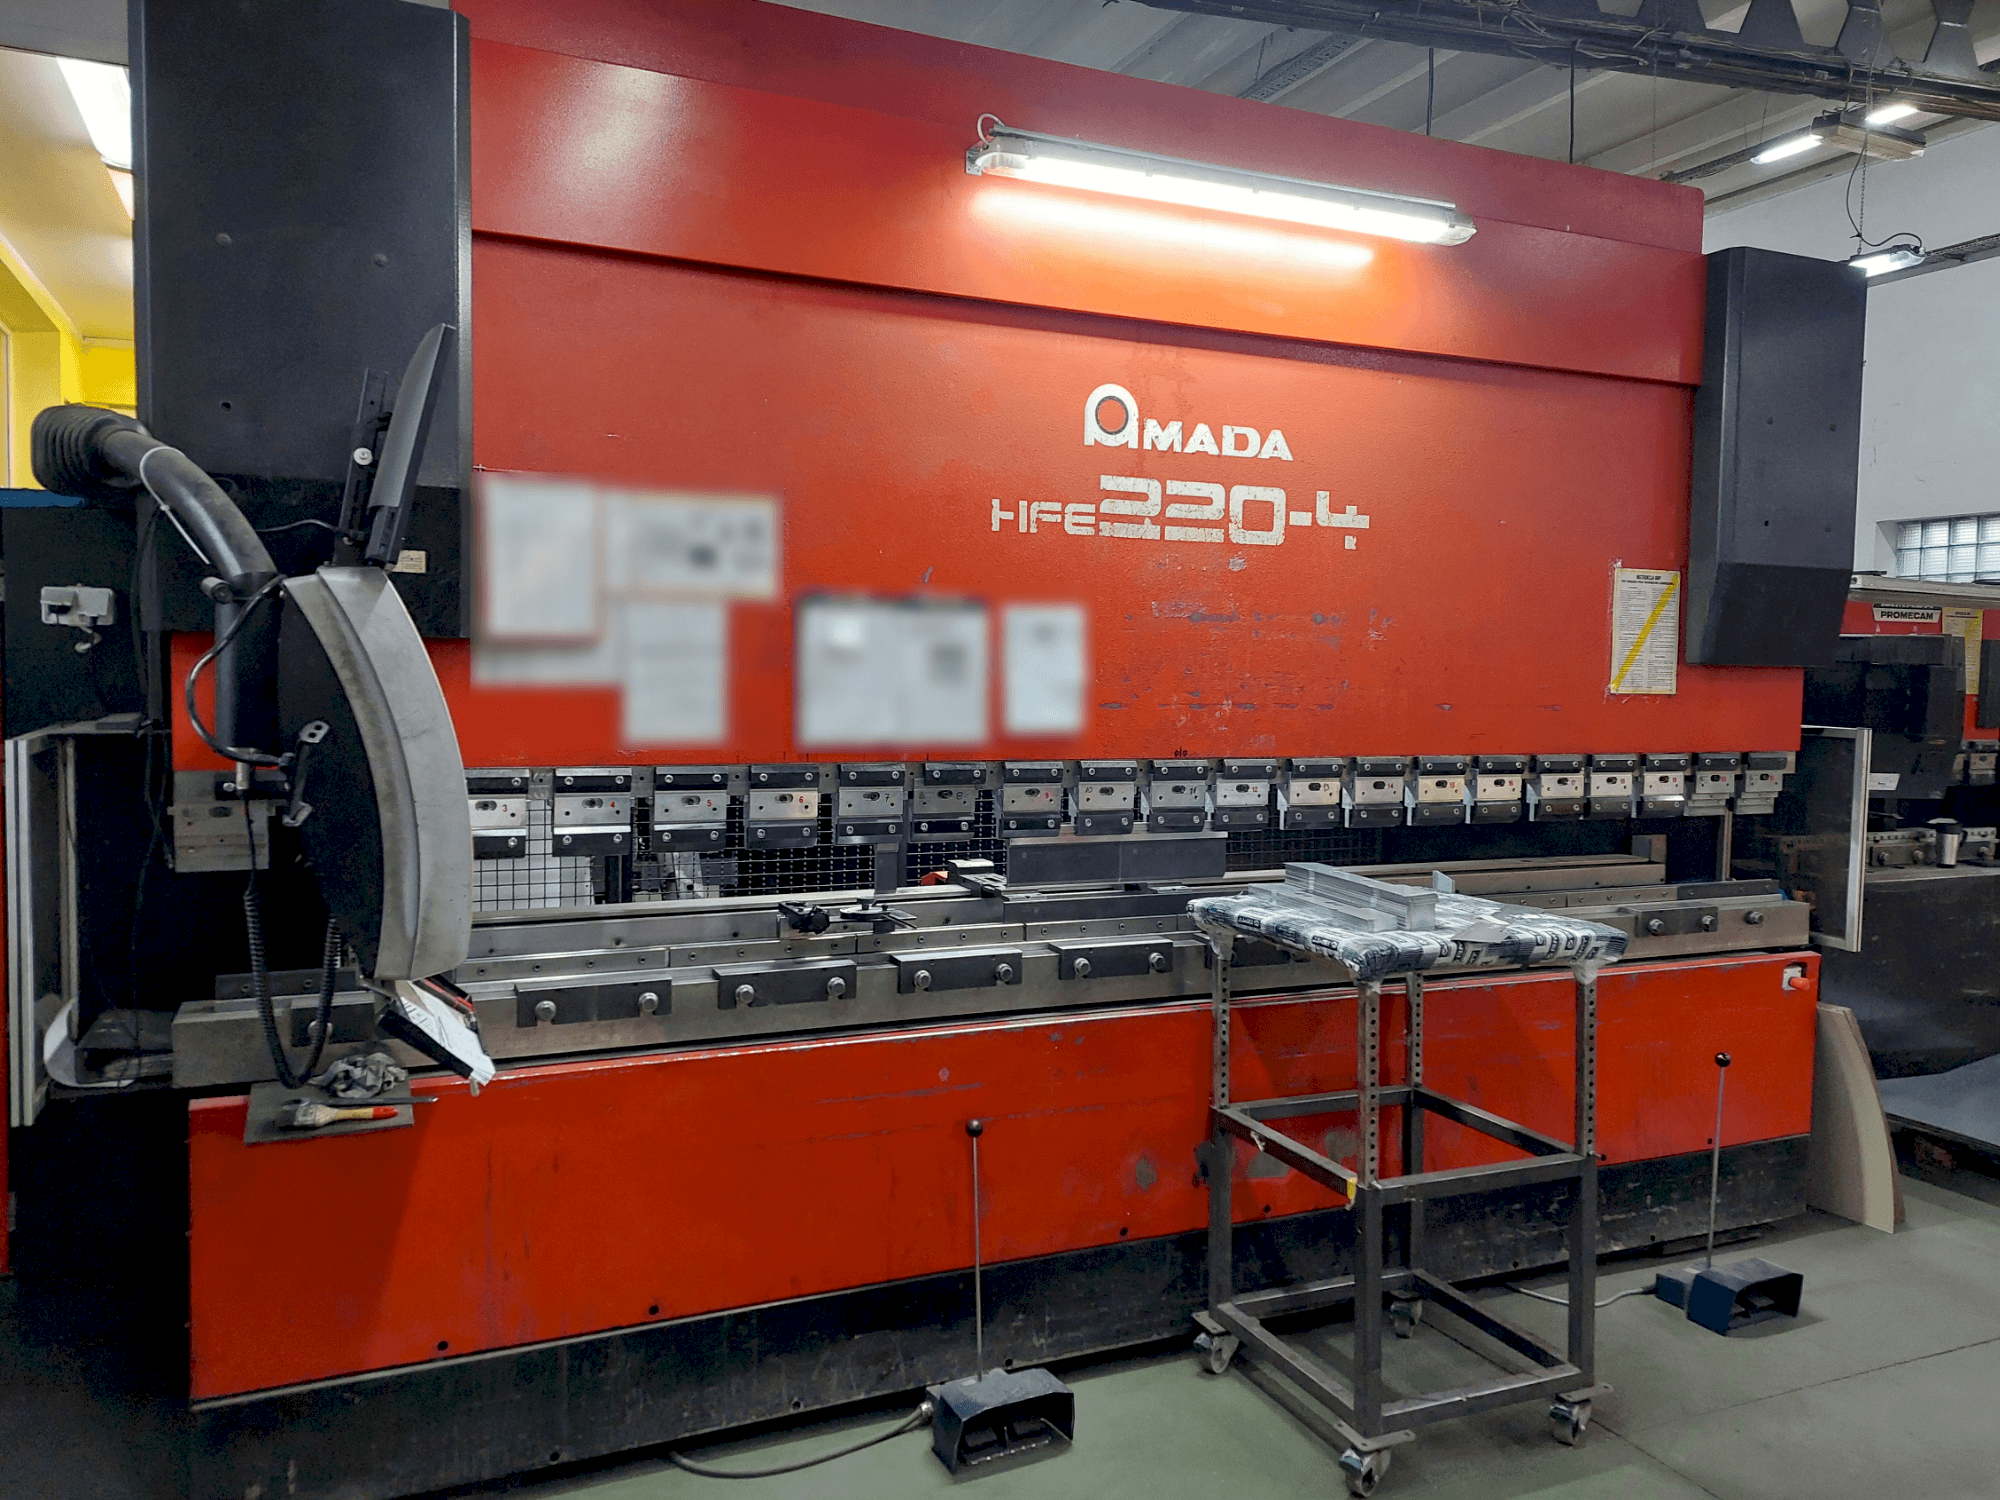 Front view of AMADA HFE 220-4  machine